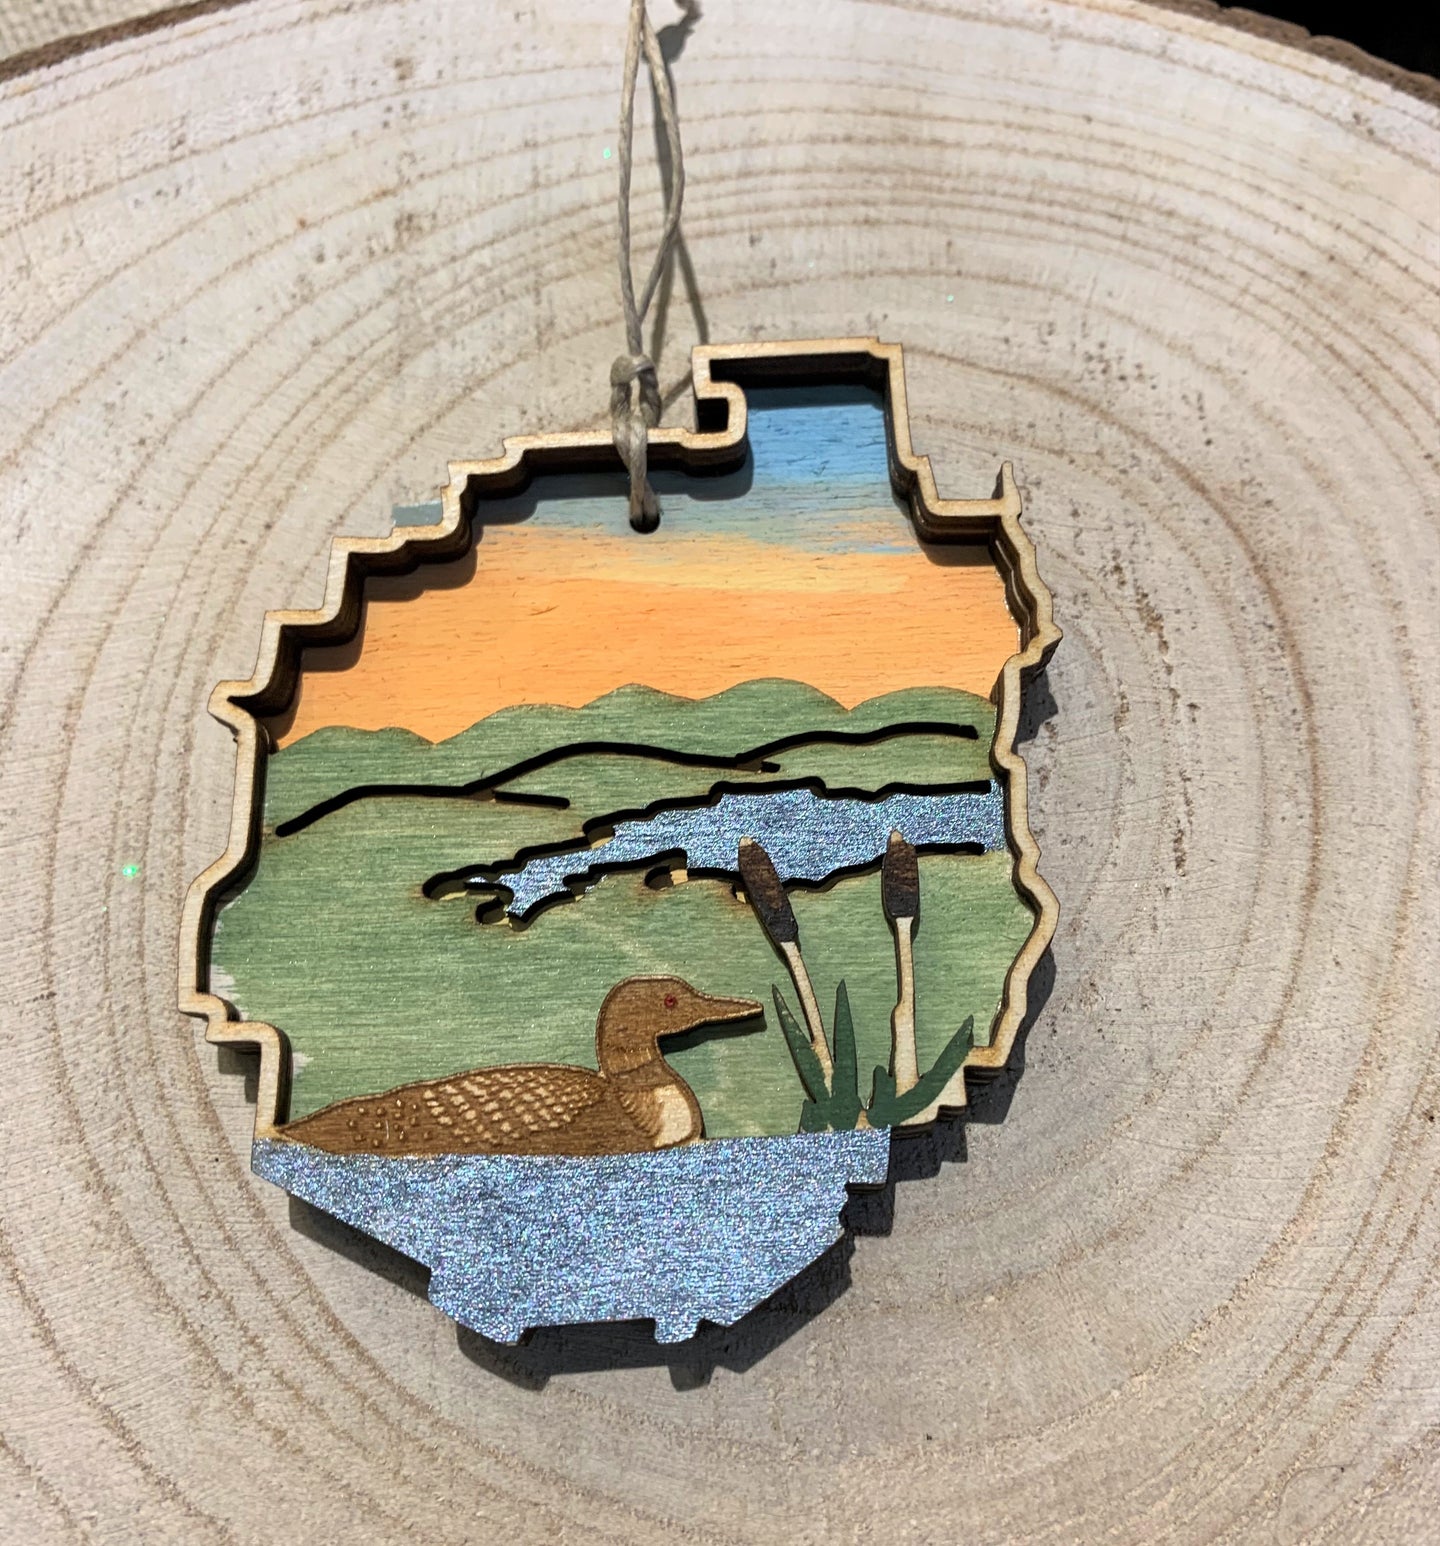 Hand Painted Adirondack Park Outline Wood Ornament.